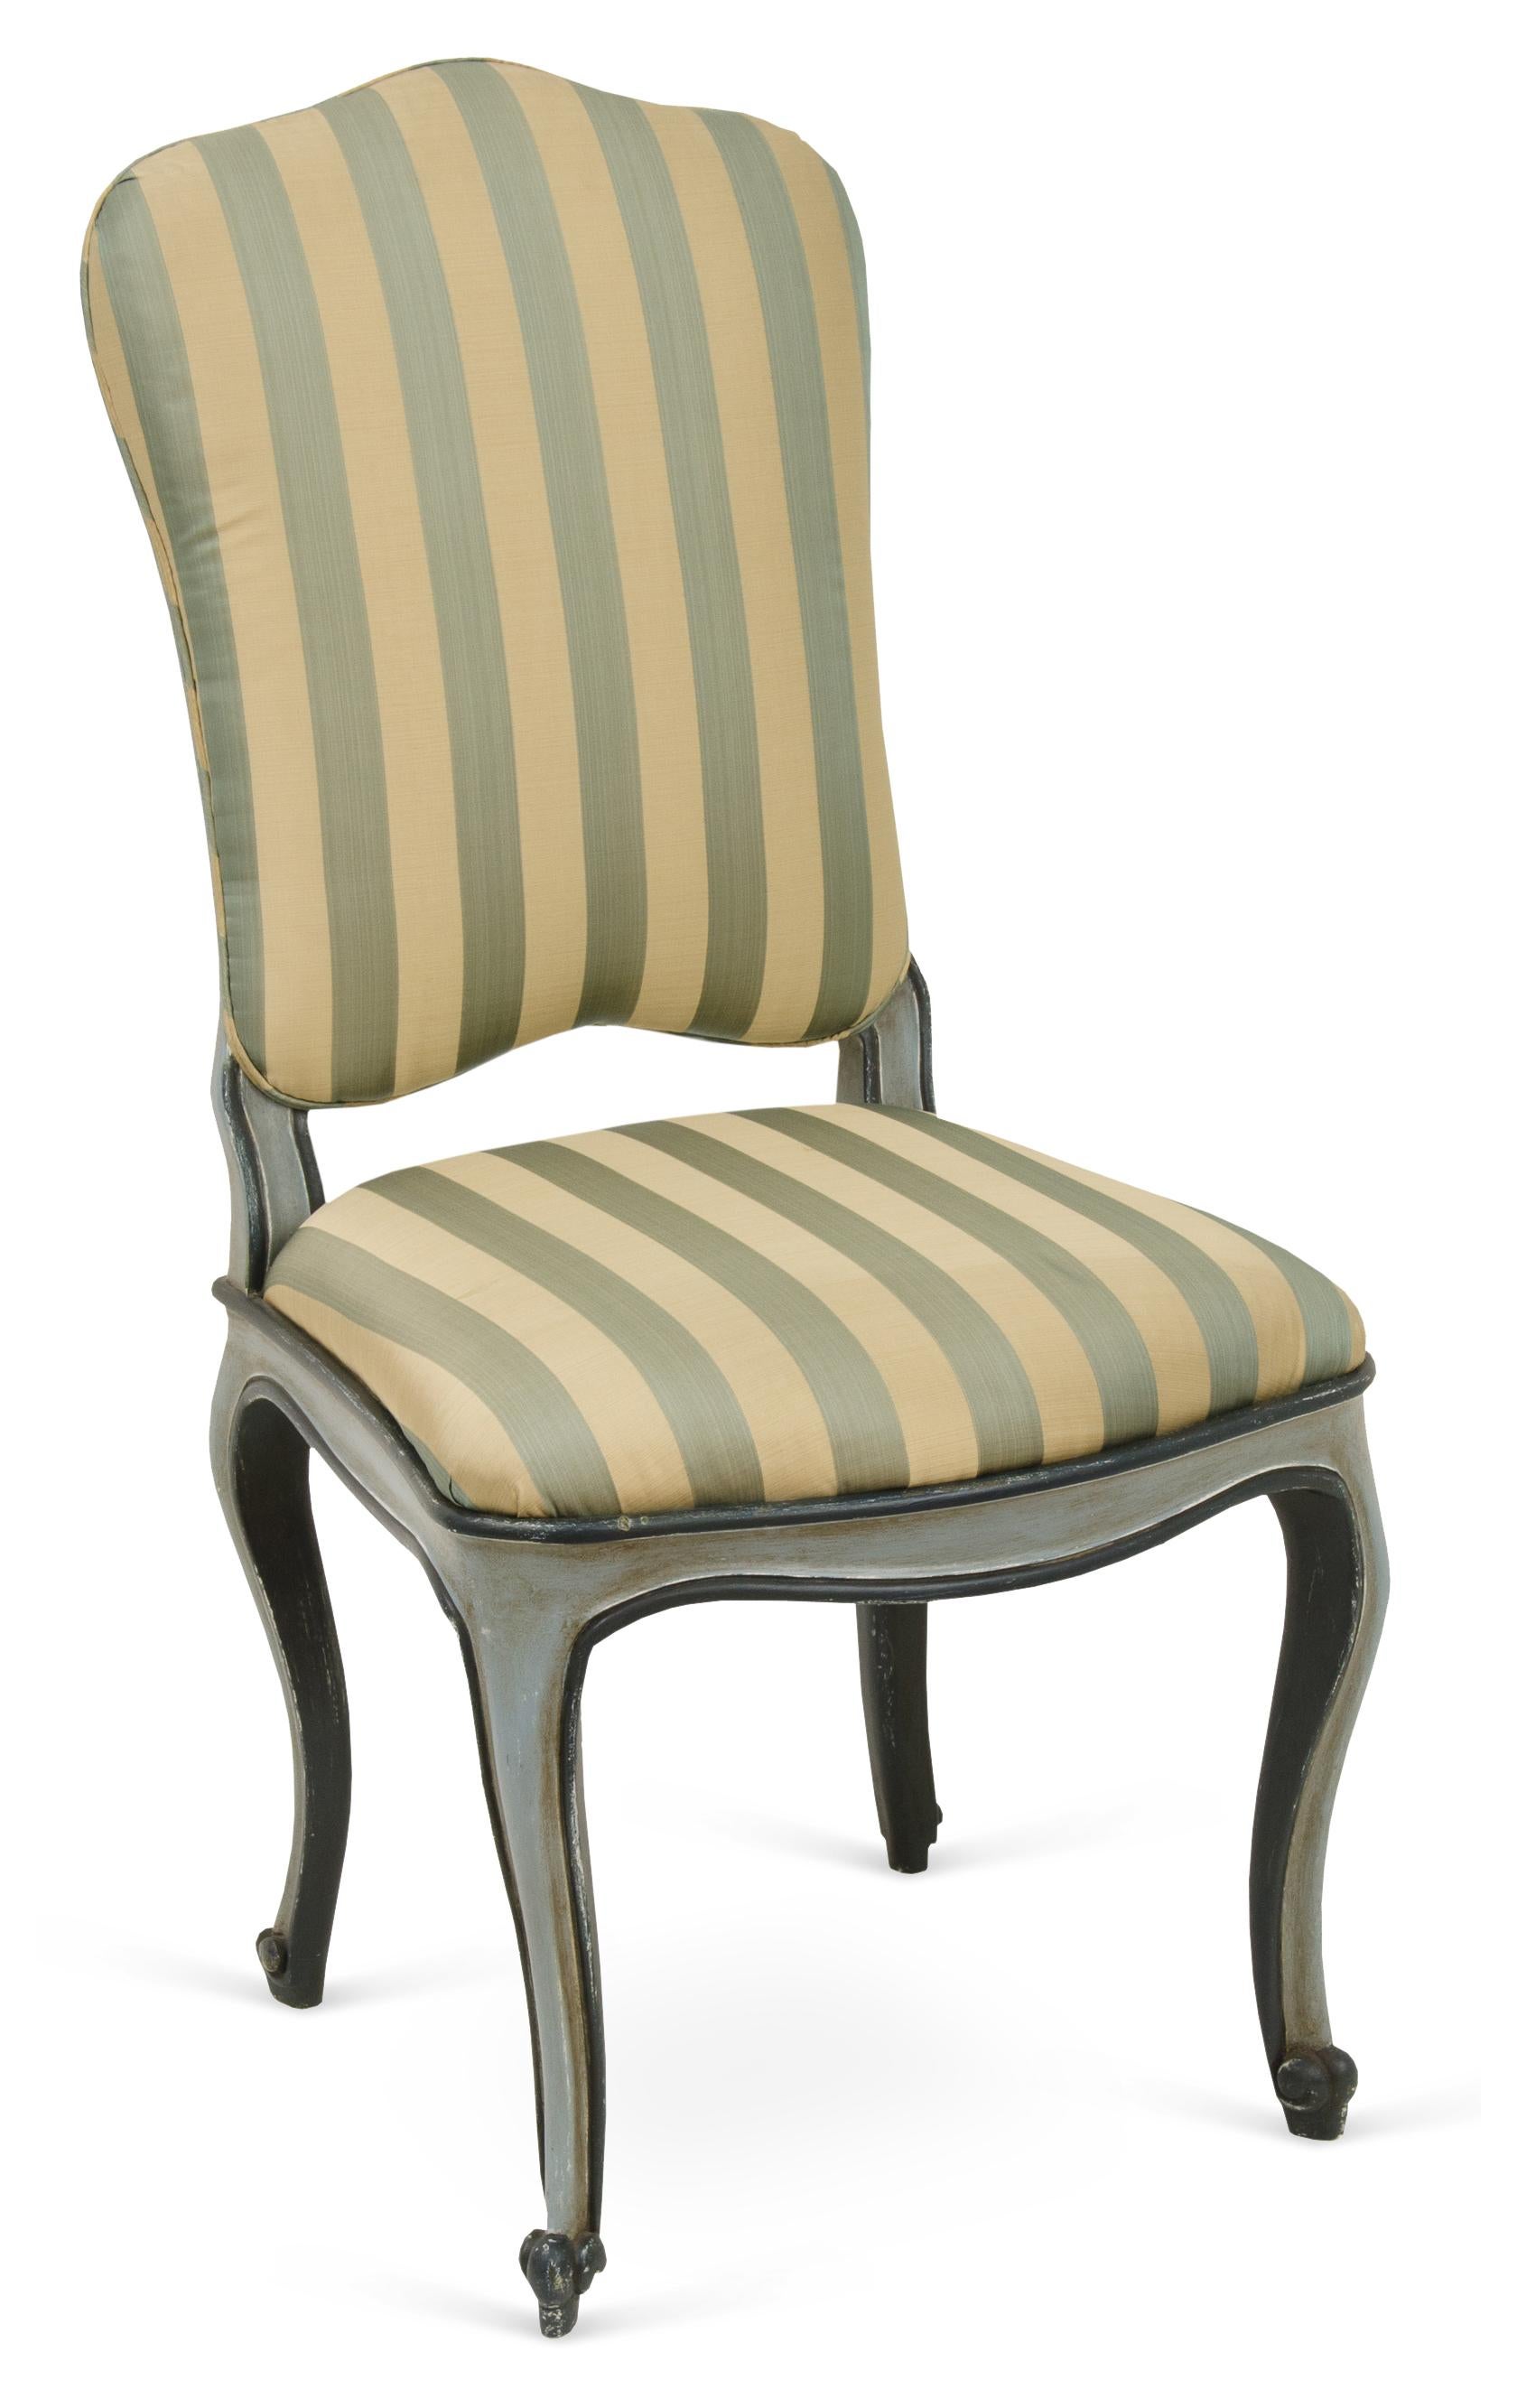 A reproduction Italian chair, hand-crafted with traditional joinery, with an antiqued paint finish and patina on the hand-carved cabriole legs. Custom sizes and finishes available.

